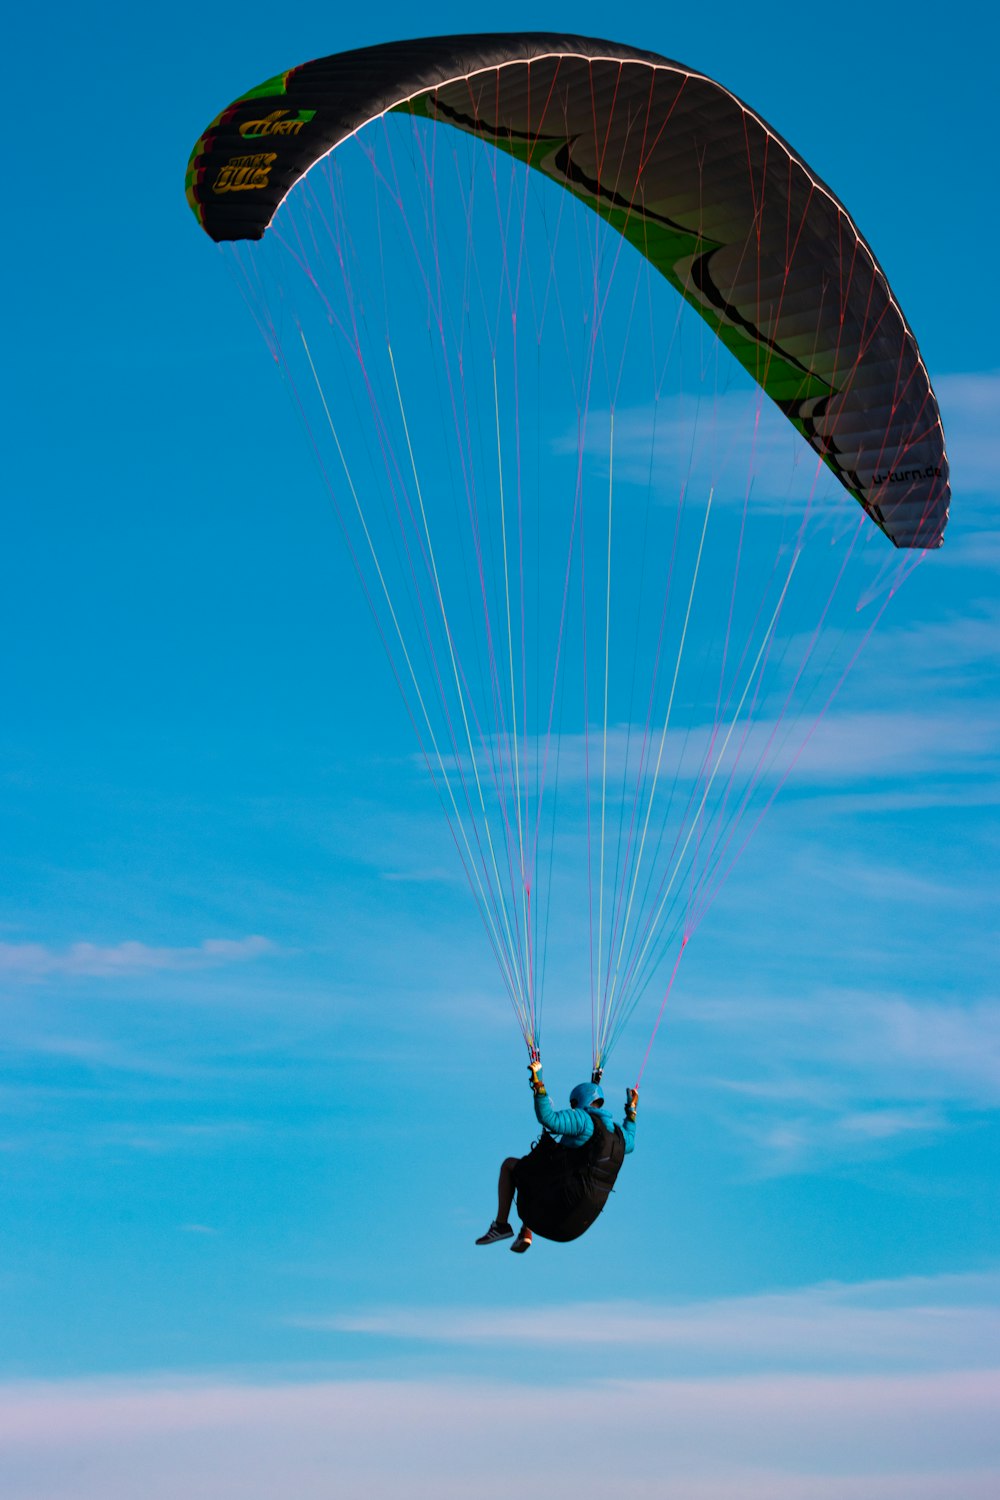 person in black jacket and black pants riding on yellow parachute